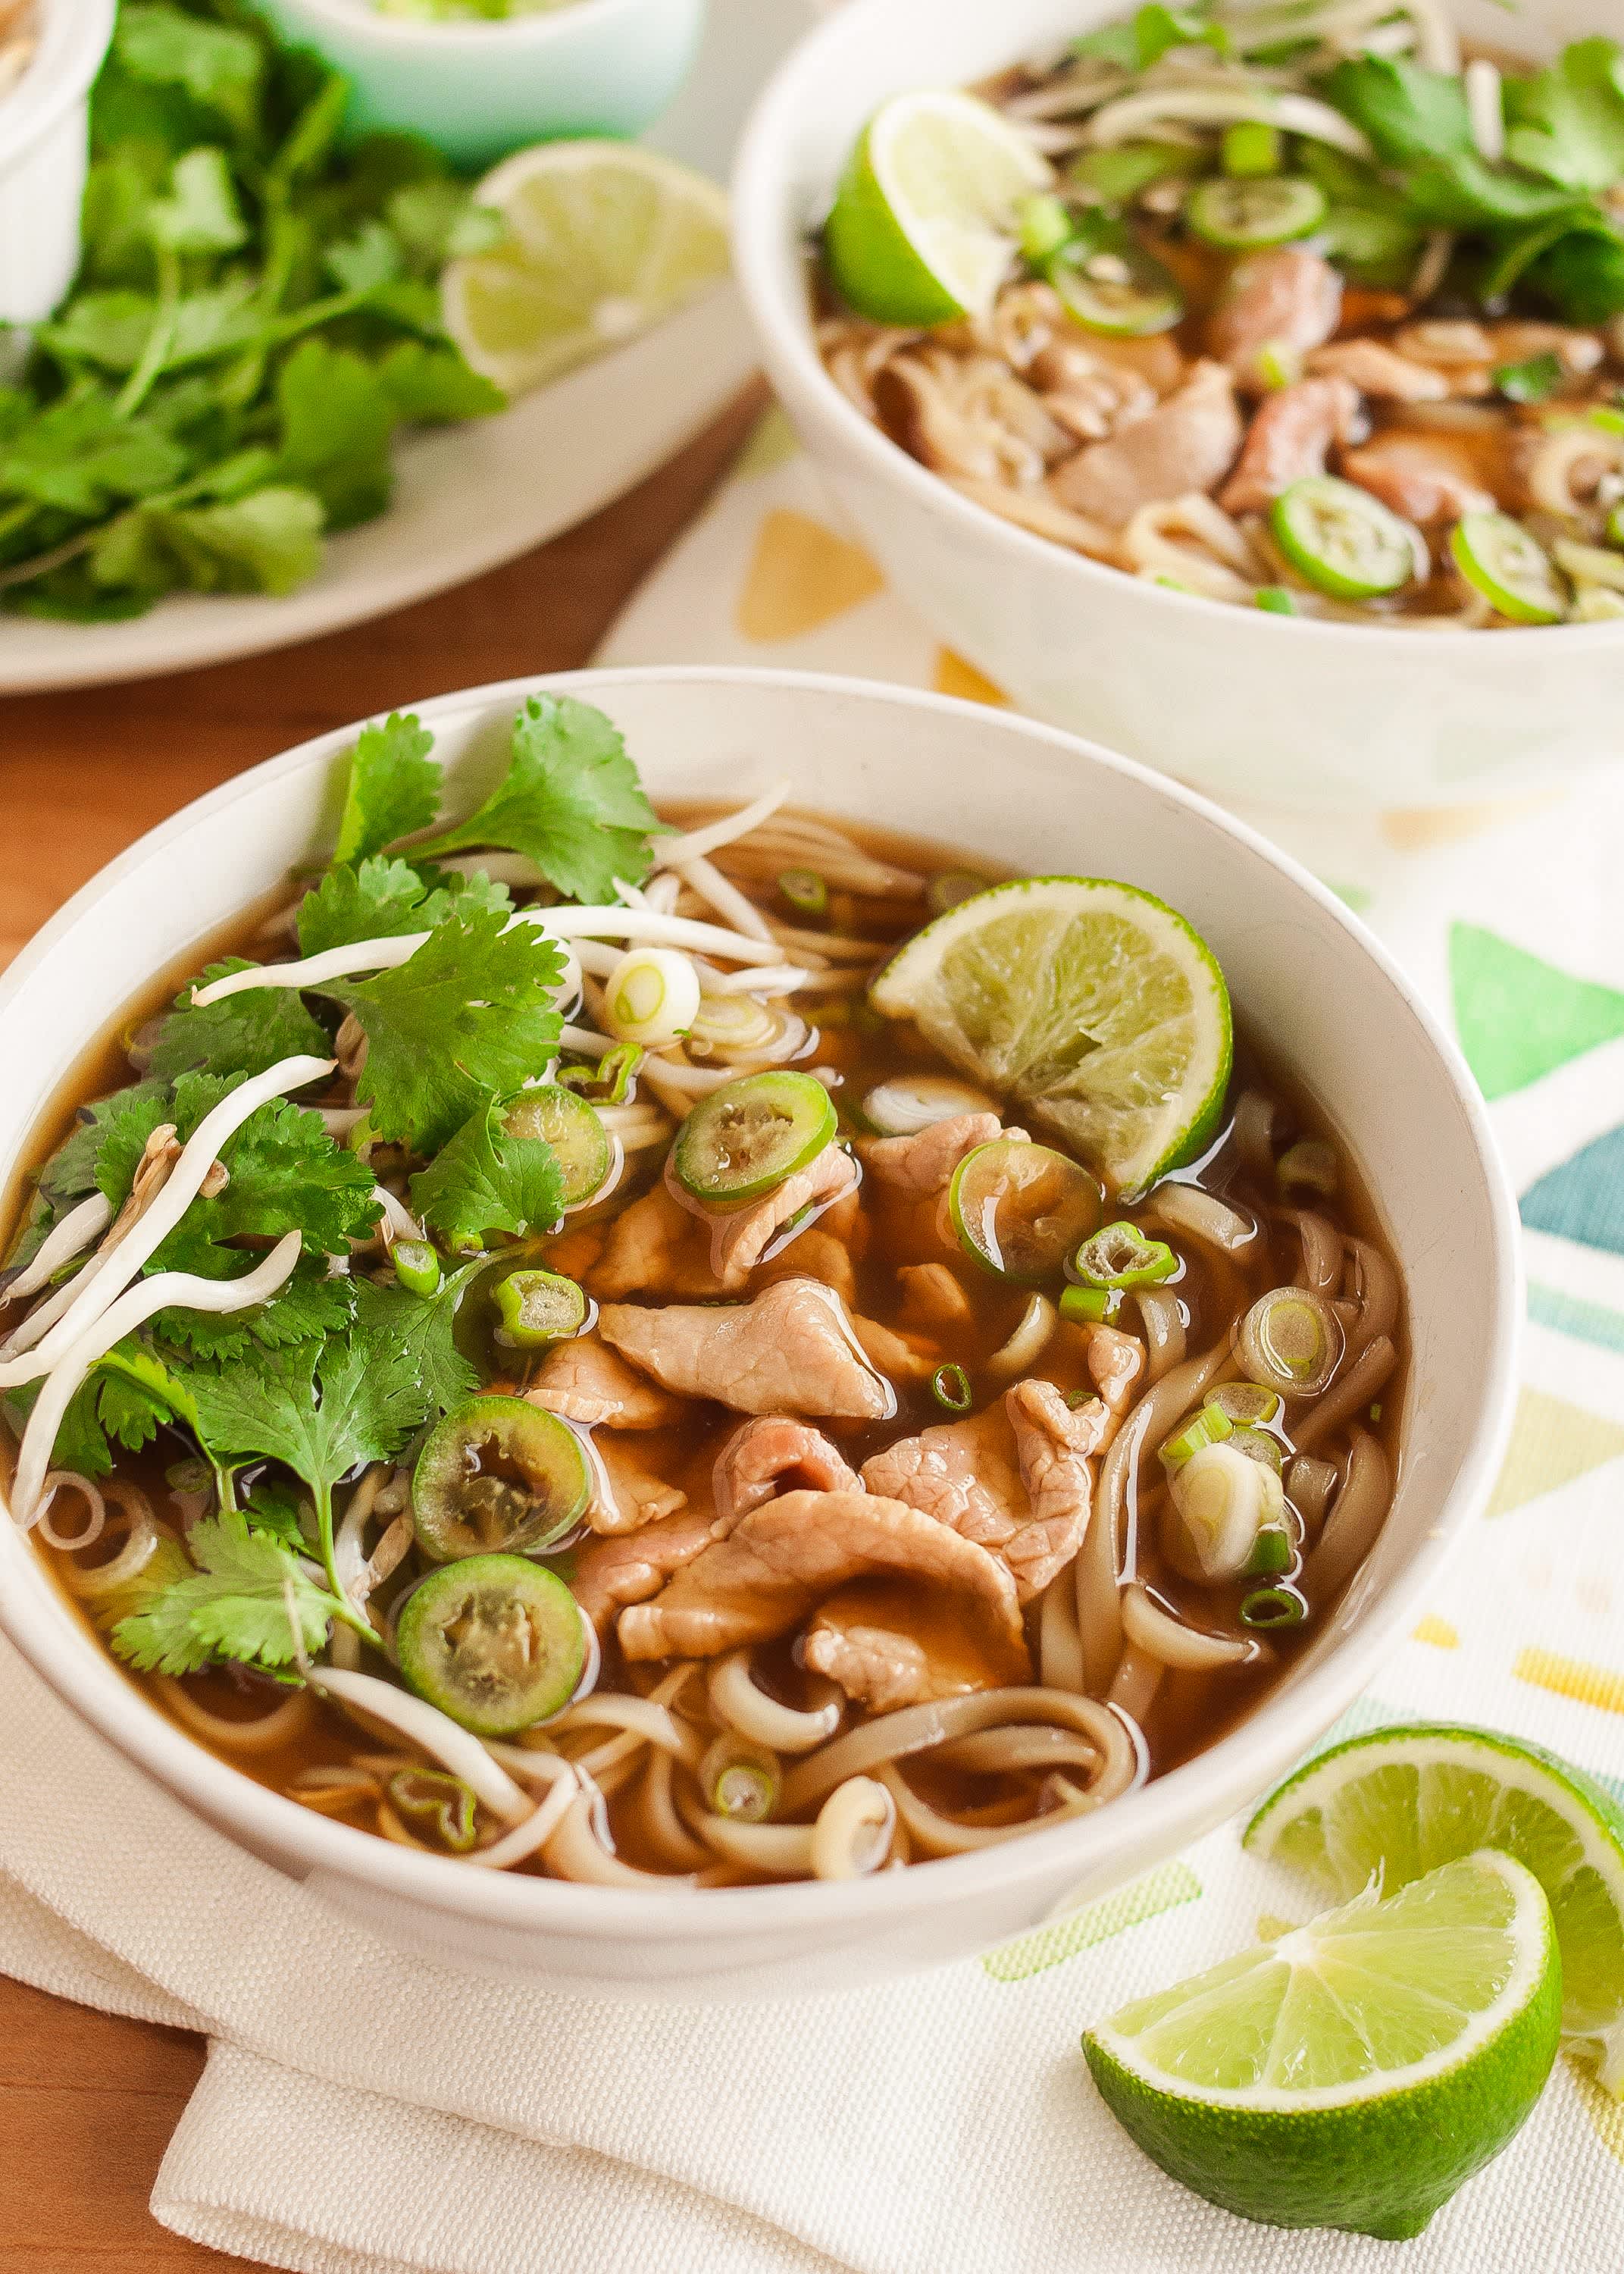 Pho Recipe - How To Make Vietnamese Beef Noodle Pho | Kitchn